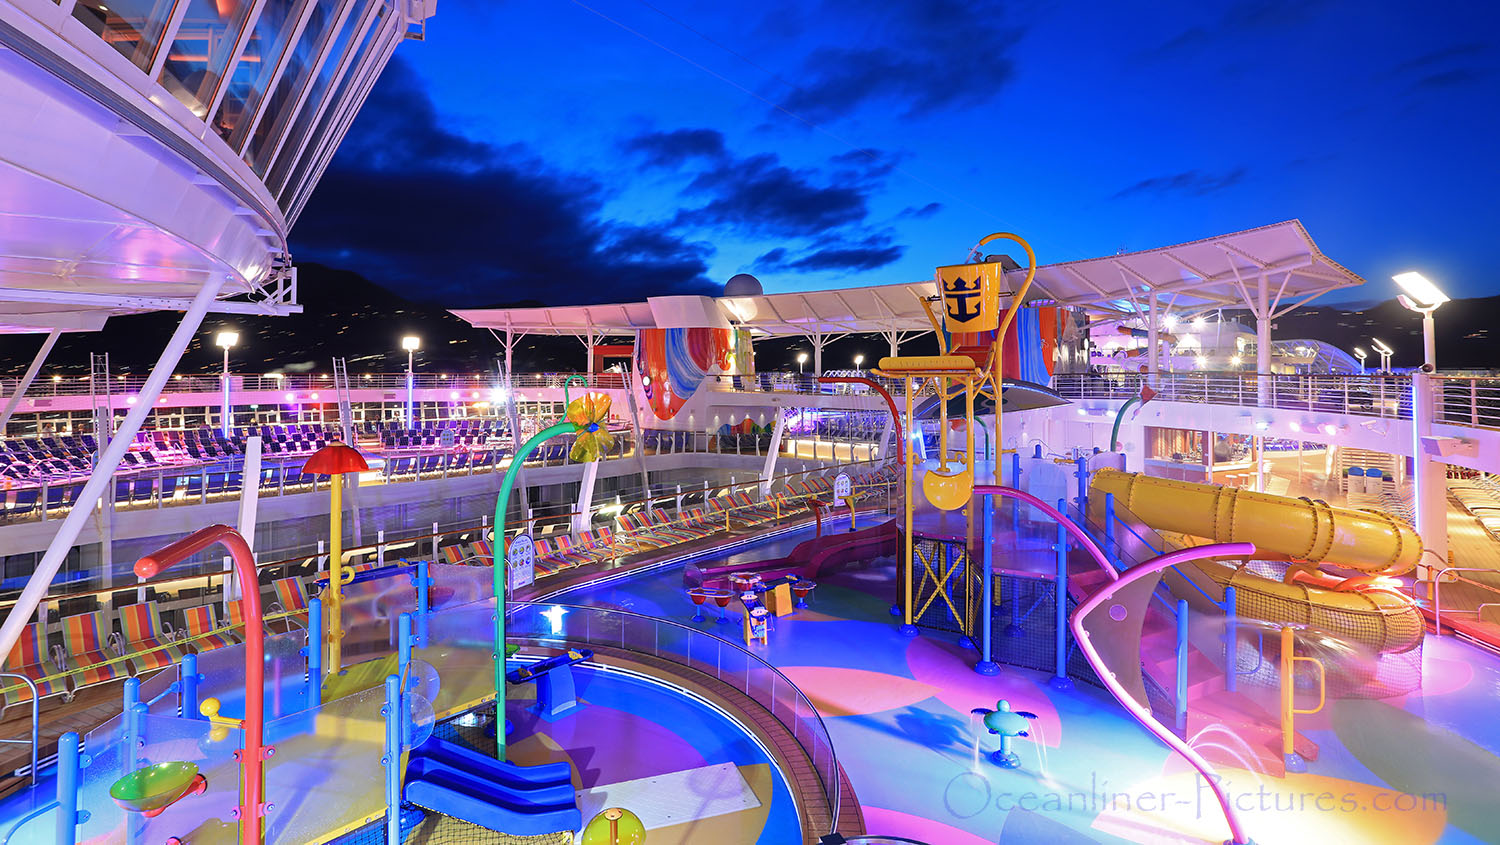 Splashaway Bay pool am Abend Symphony of the Seas. / Foto: Oliver Asmussen/oceanliner-pictures.com